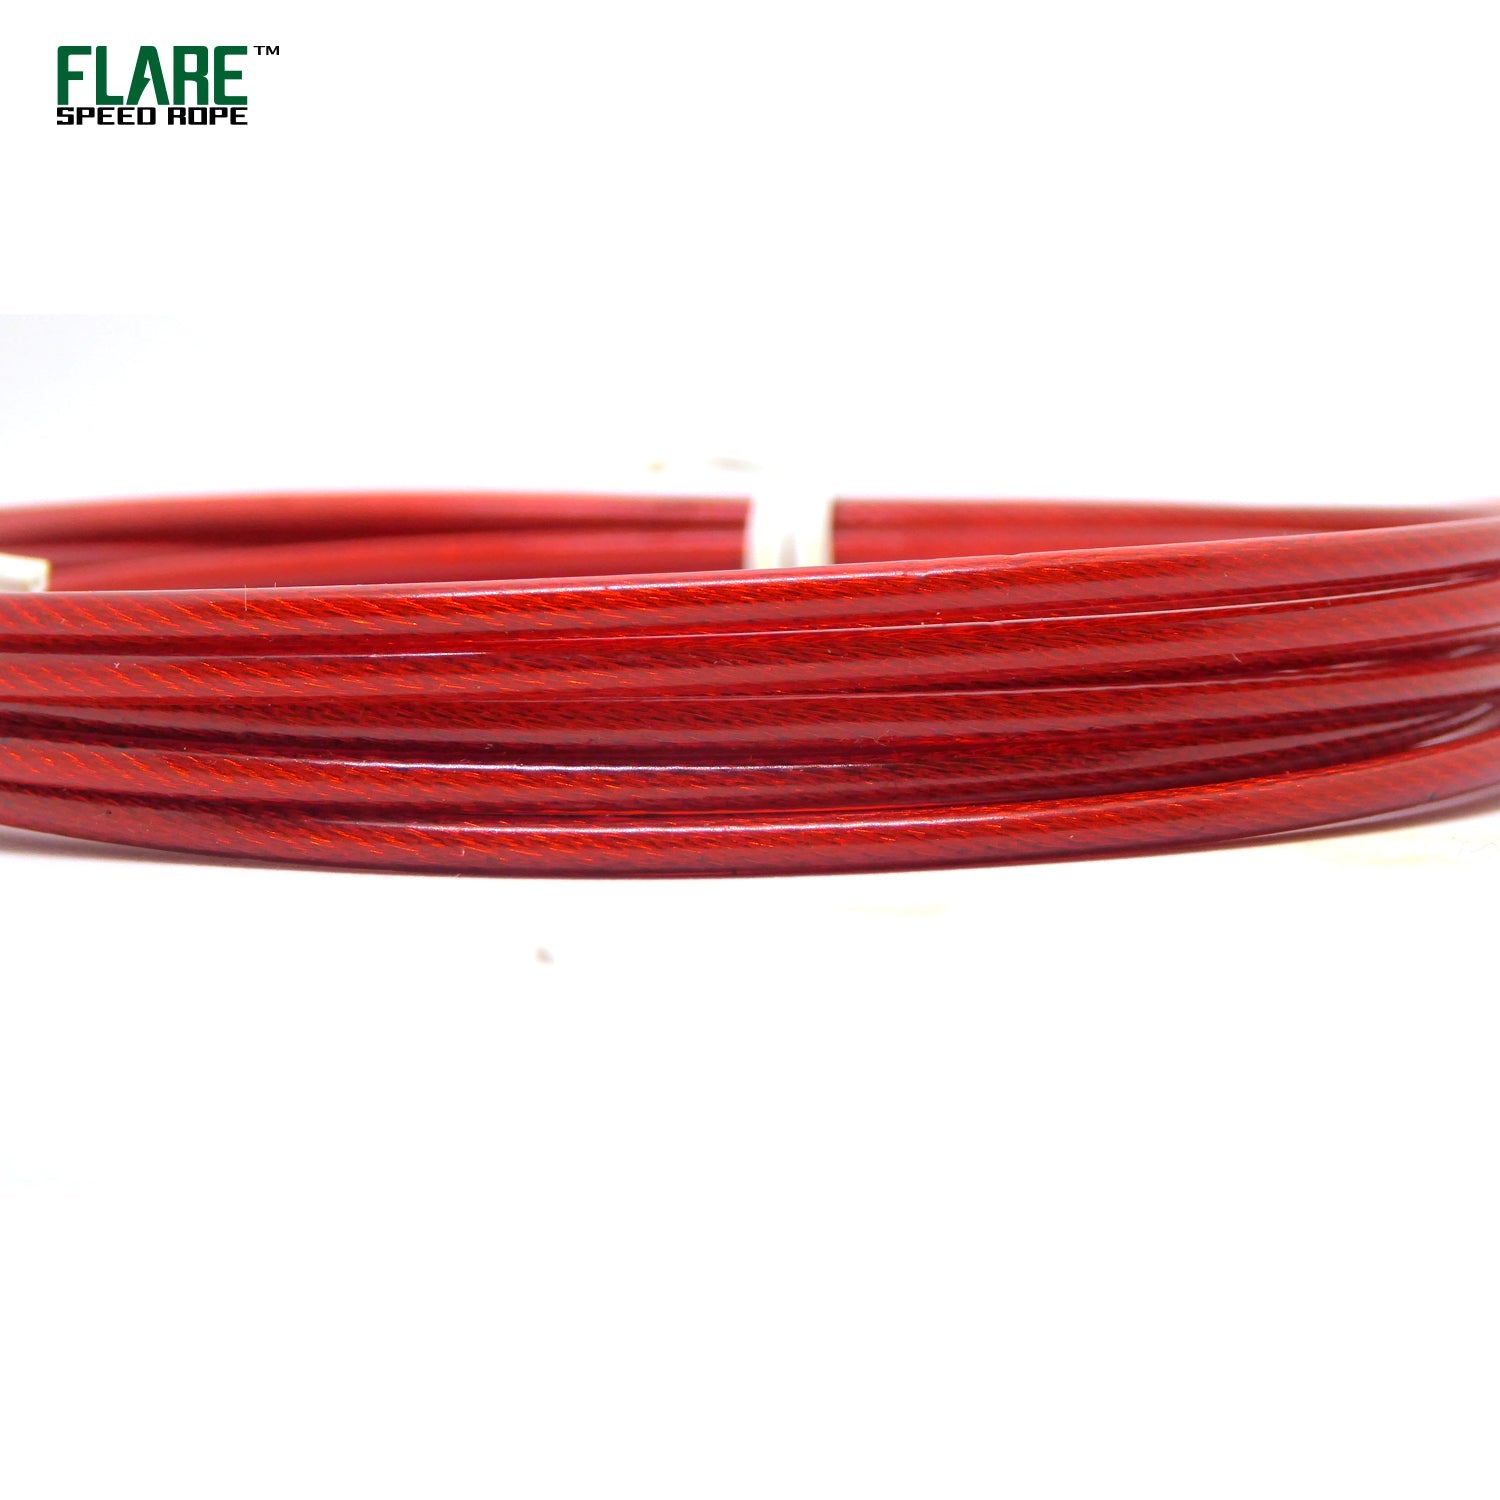 Flare replacement speed rope cables red pvc cable